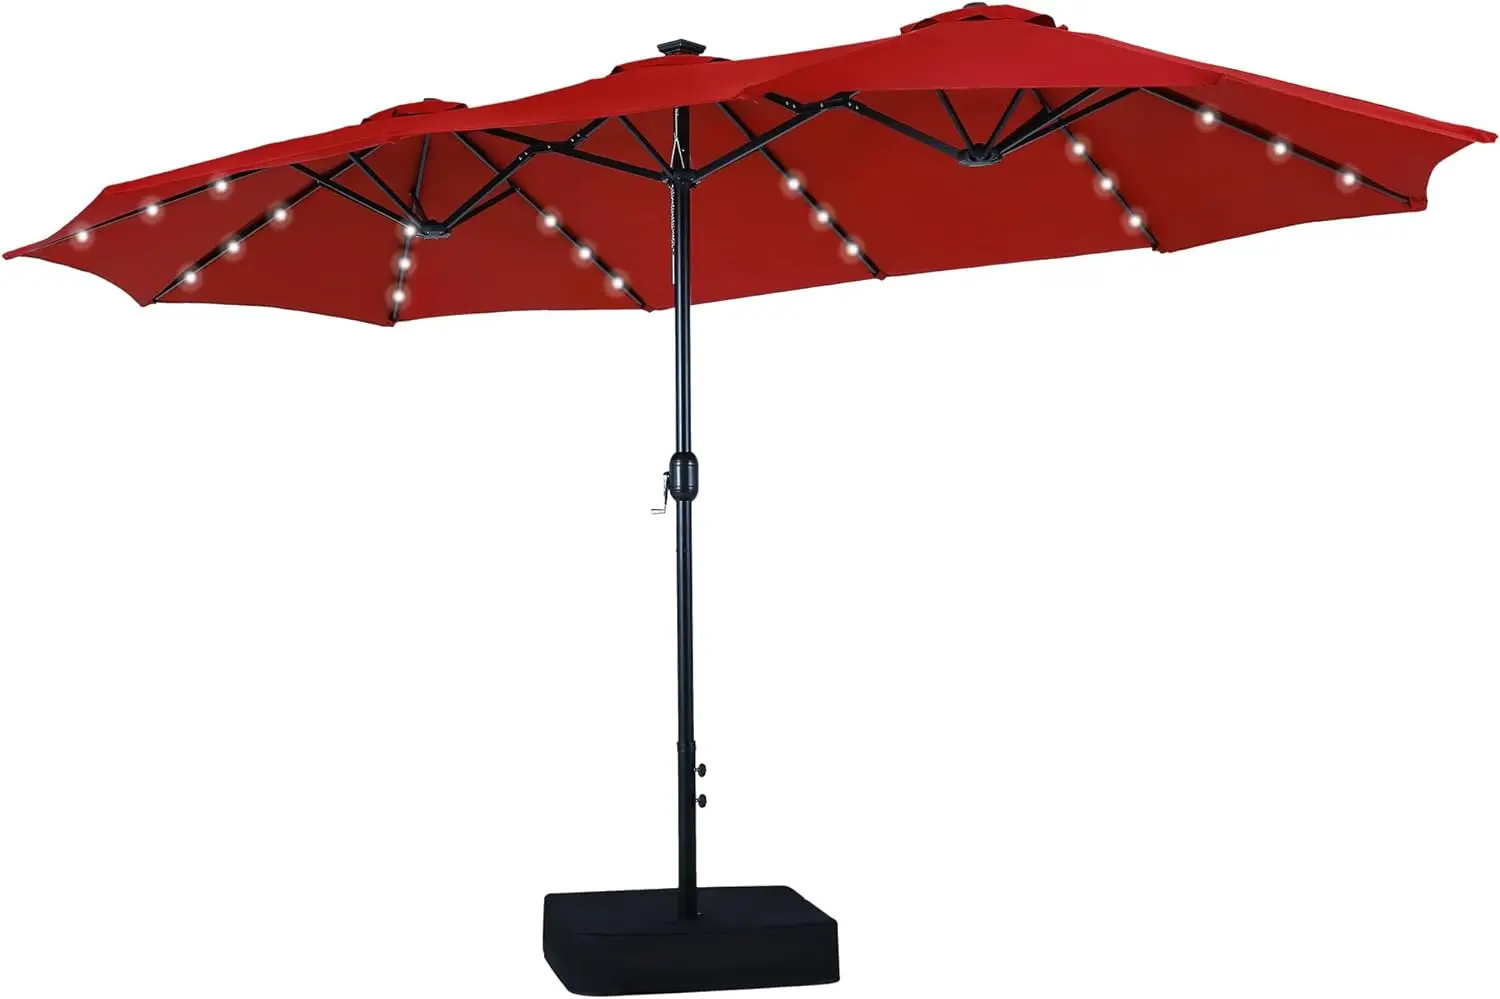 

15ft Double Sided Patio Umbrella with Solar Lights, Outdoor Large Rectangular Market Umbrellas with Base Included